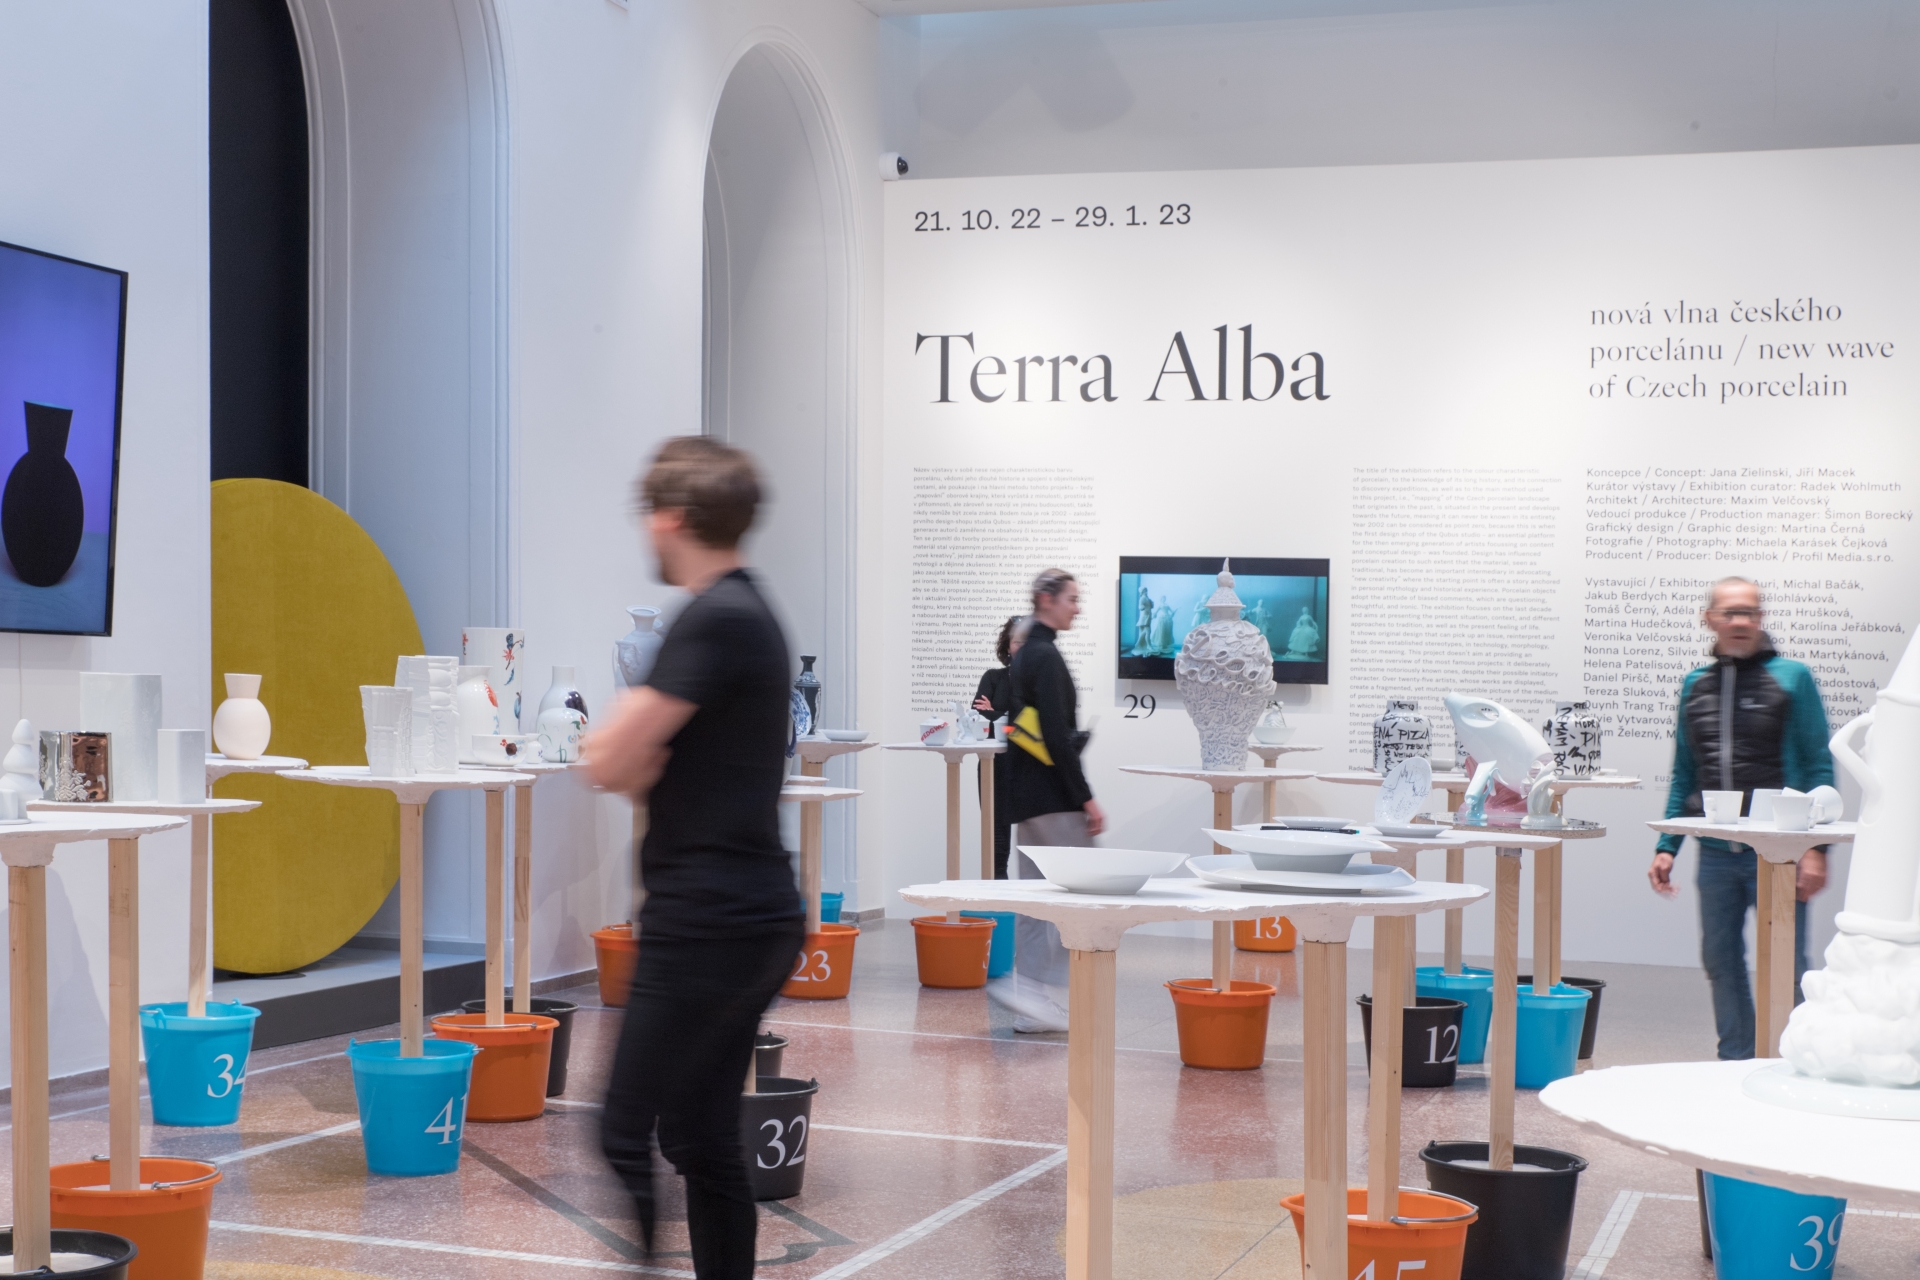 The exhibition Terra Alba – the New Wave of Czech Porcelain continues in the Museum of Decorative Arts in Brno